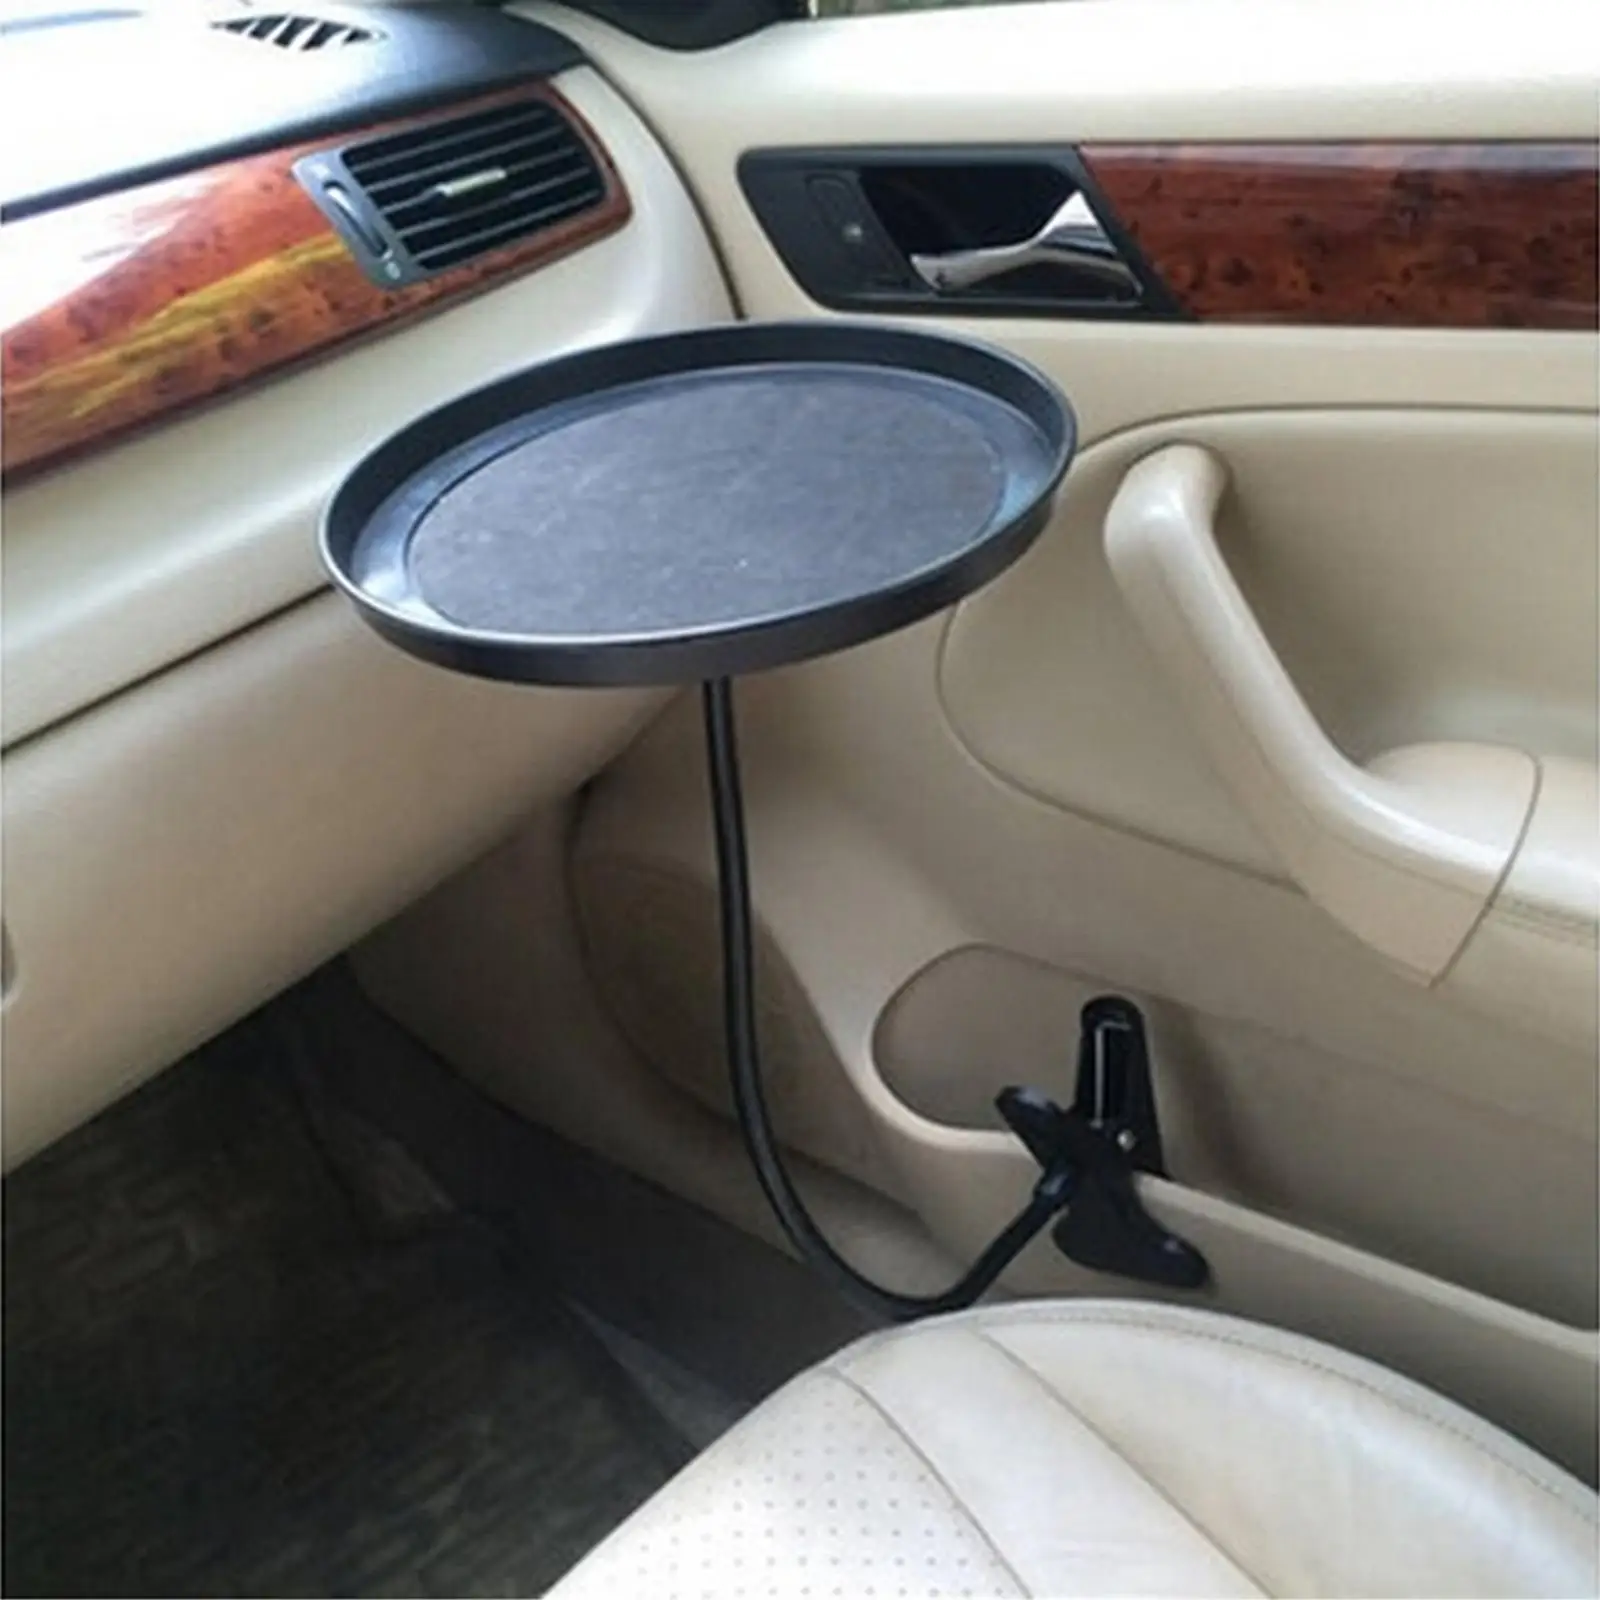 1x Car Food Tray Anti-Slip Stand with Clamp for Passenger Seat